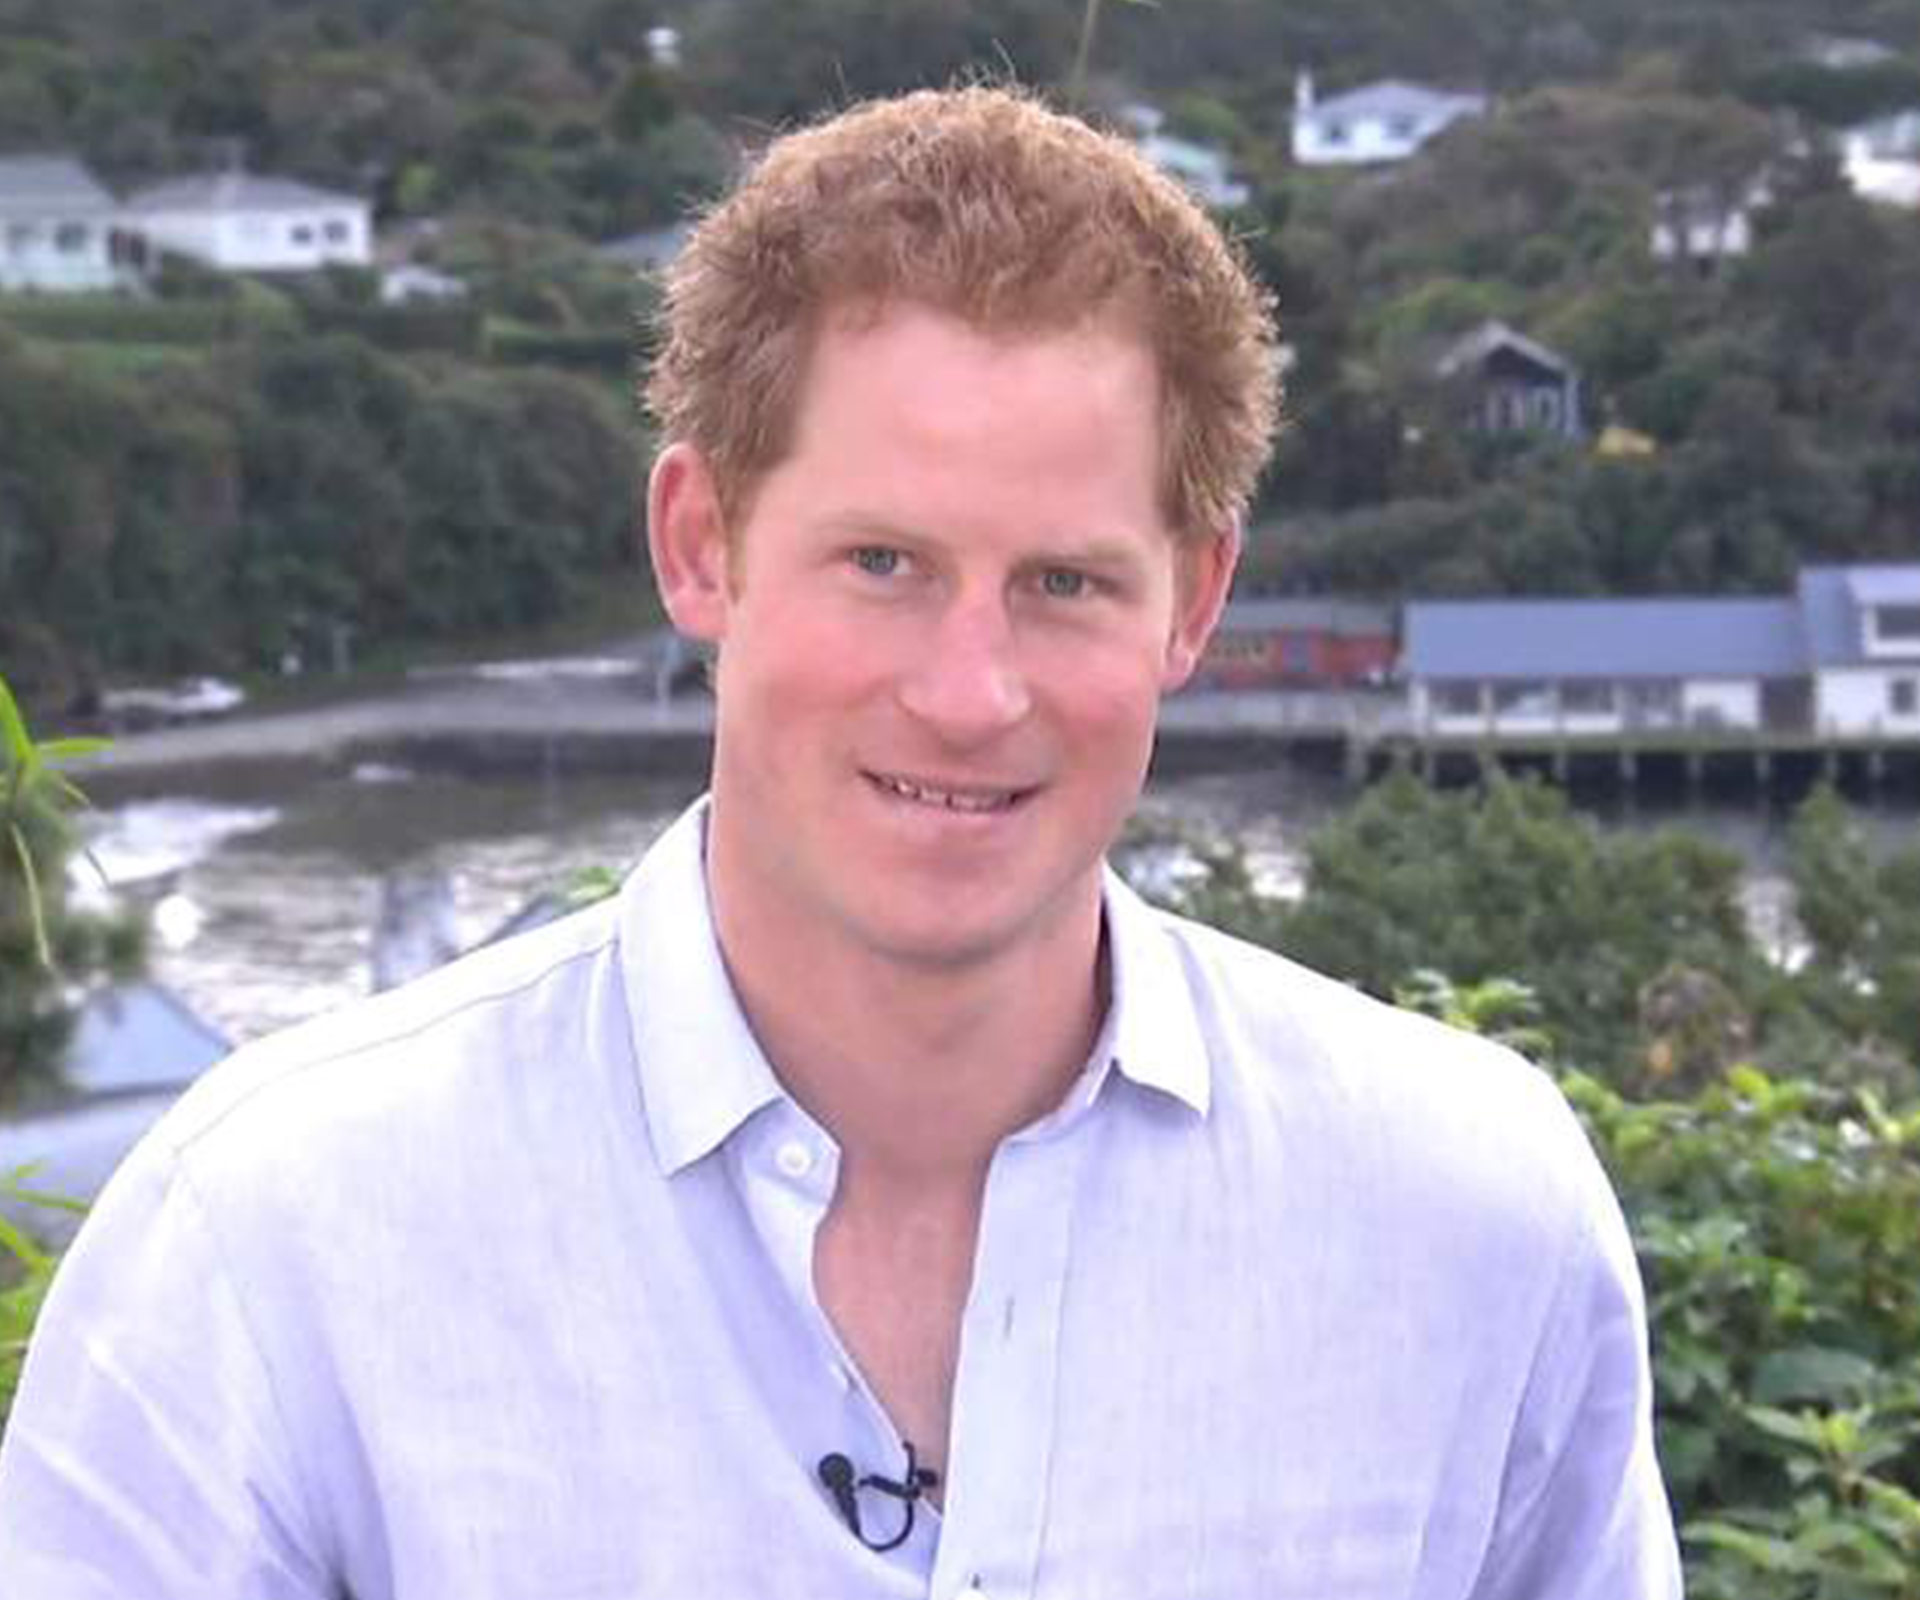 Broody Prince Harry would love to have kids